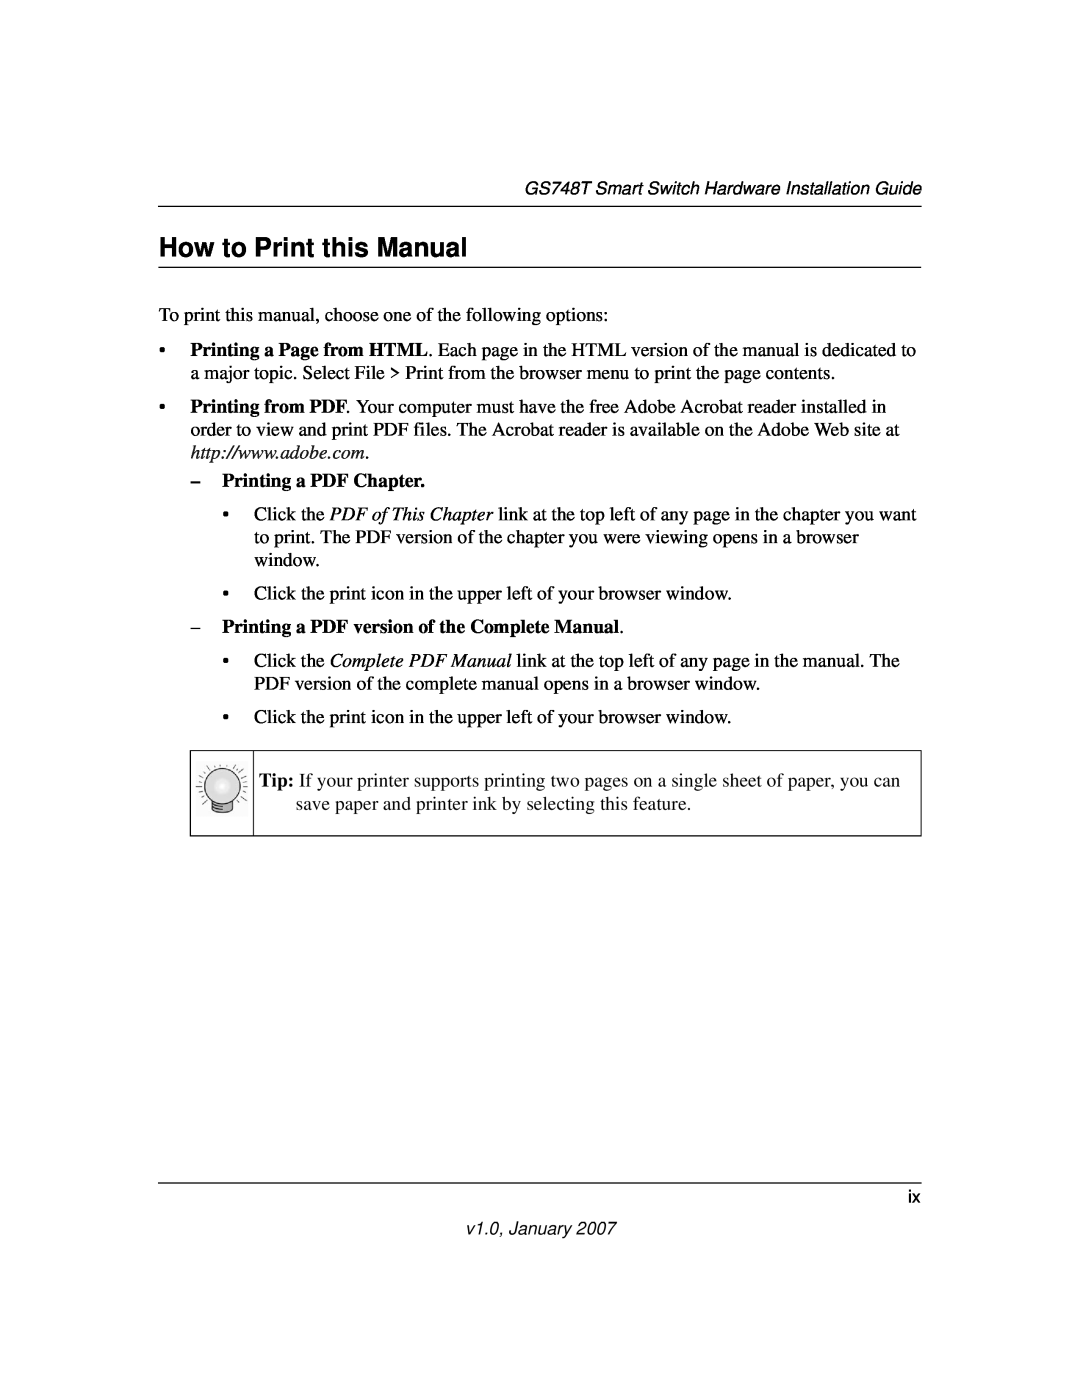 NETGEAR GS748T manual How to Print this Manual, Printing a PDF Chapter, Printing a PDF version of the Complete Manual 